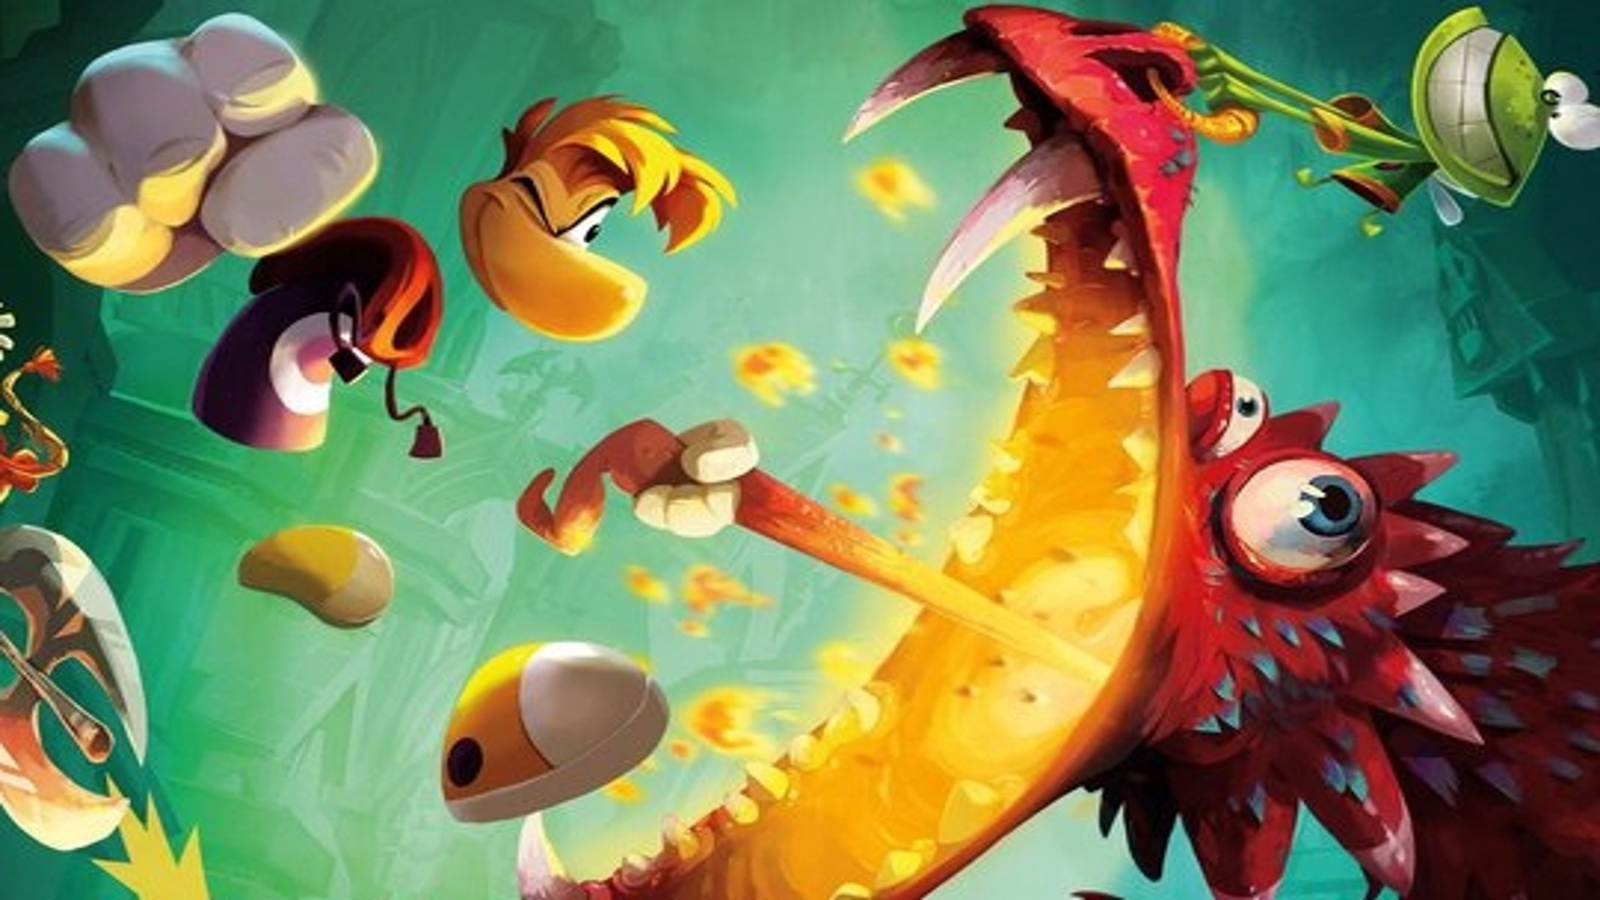 Rayman Legends: Definitive Edition slated for September on Switch